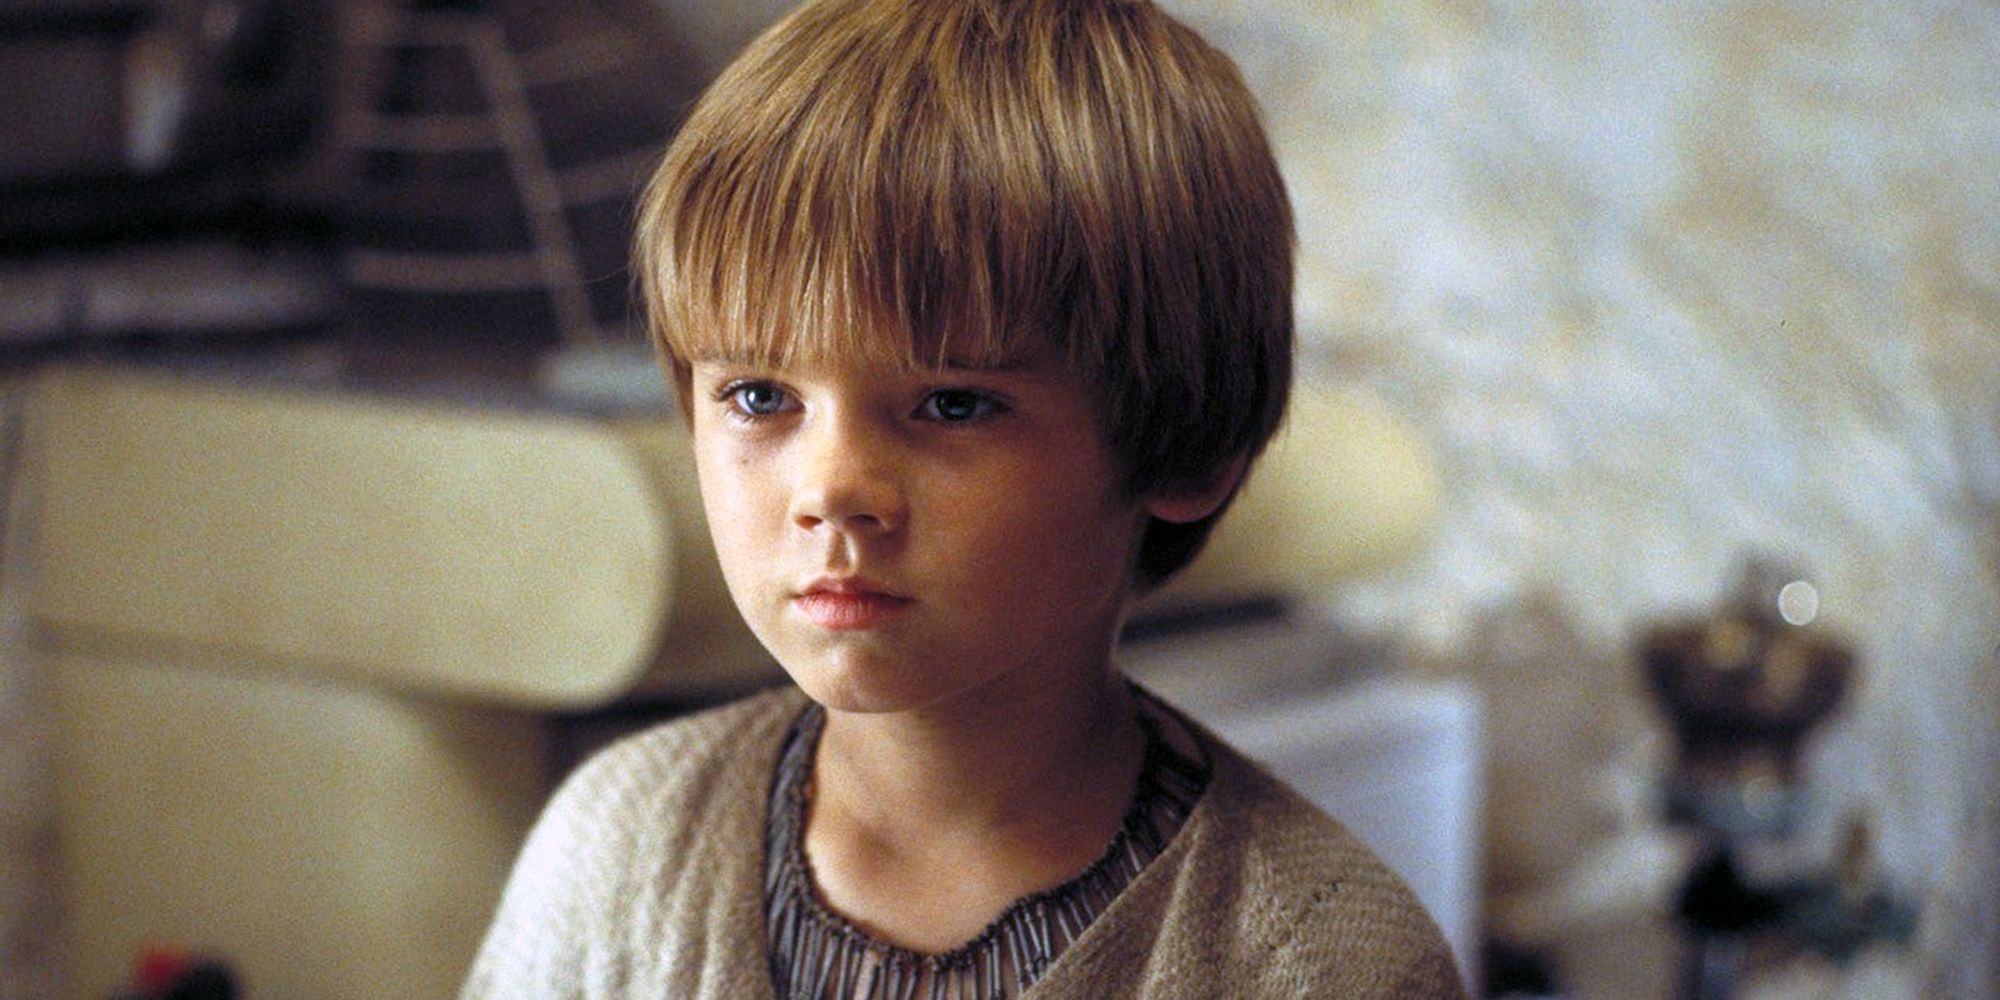 Jake Lloyd's portrayal of the young Darth Vader, Anakin Skywalker, raised the ire of fans and critics and ultimately saw him walk away from Hollywood